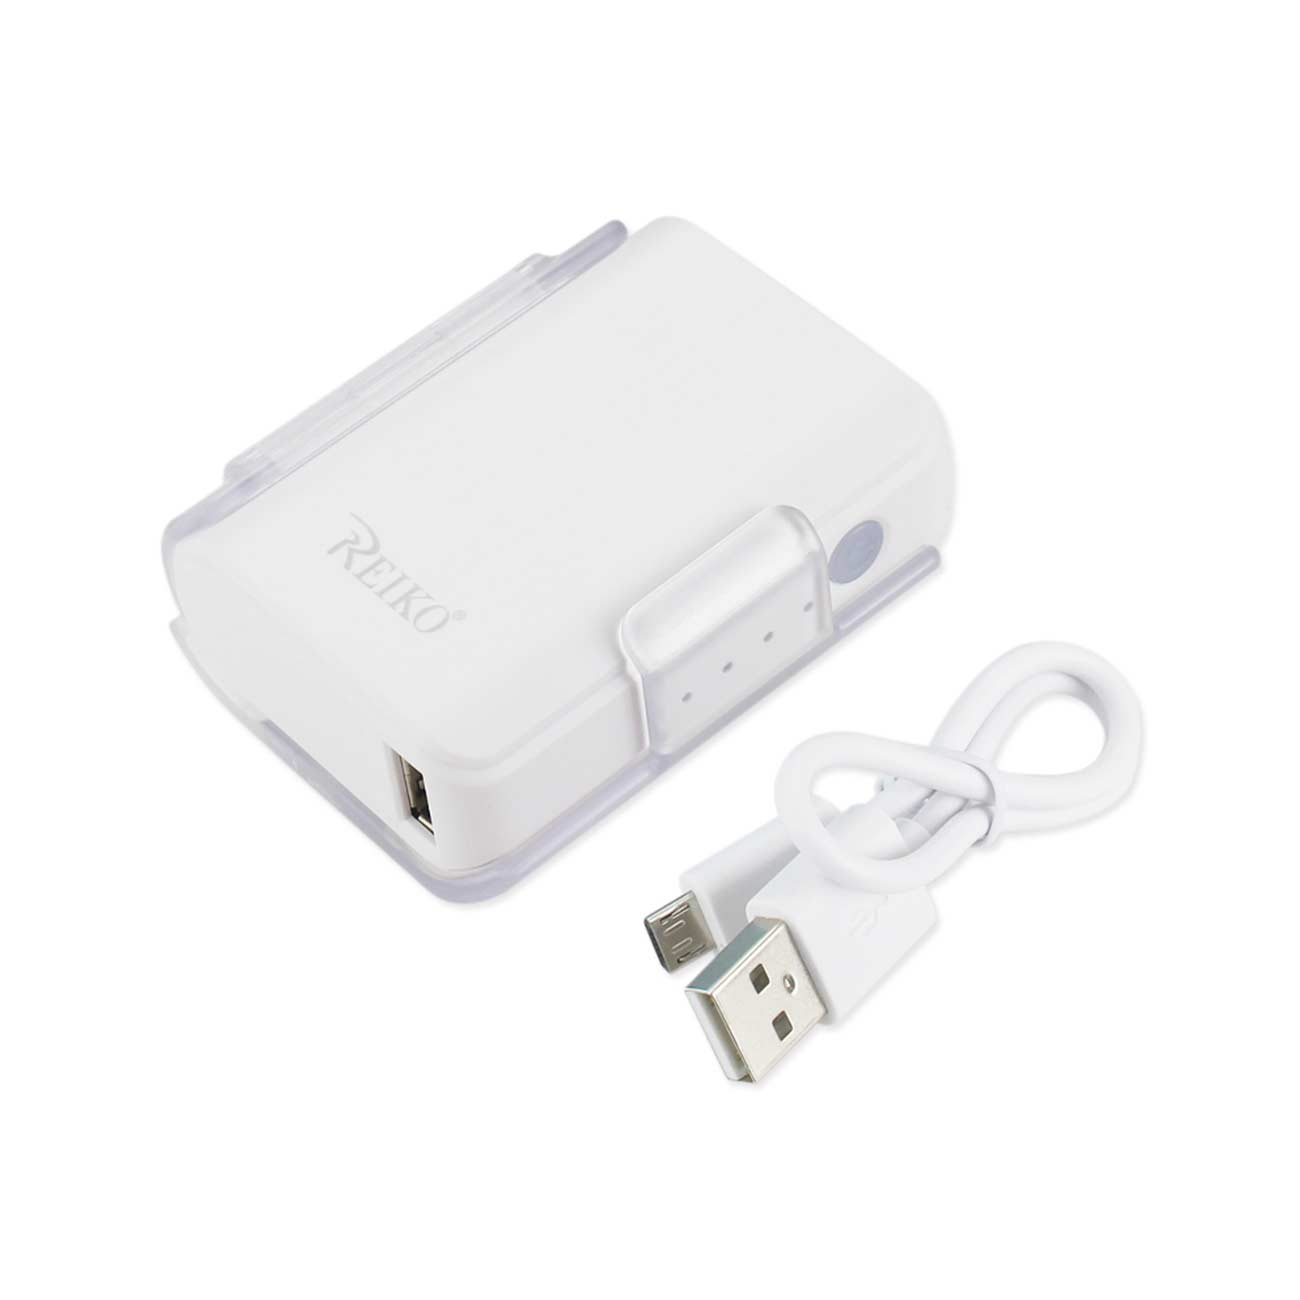 Power Bank Universal With Cable 4000Mah White Color